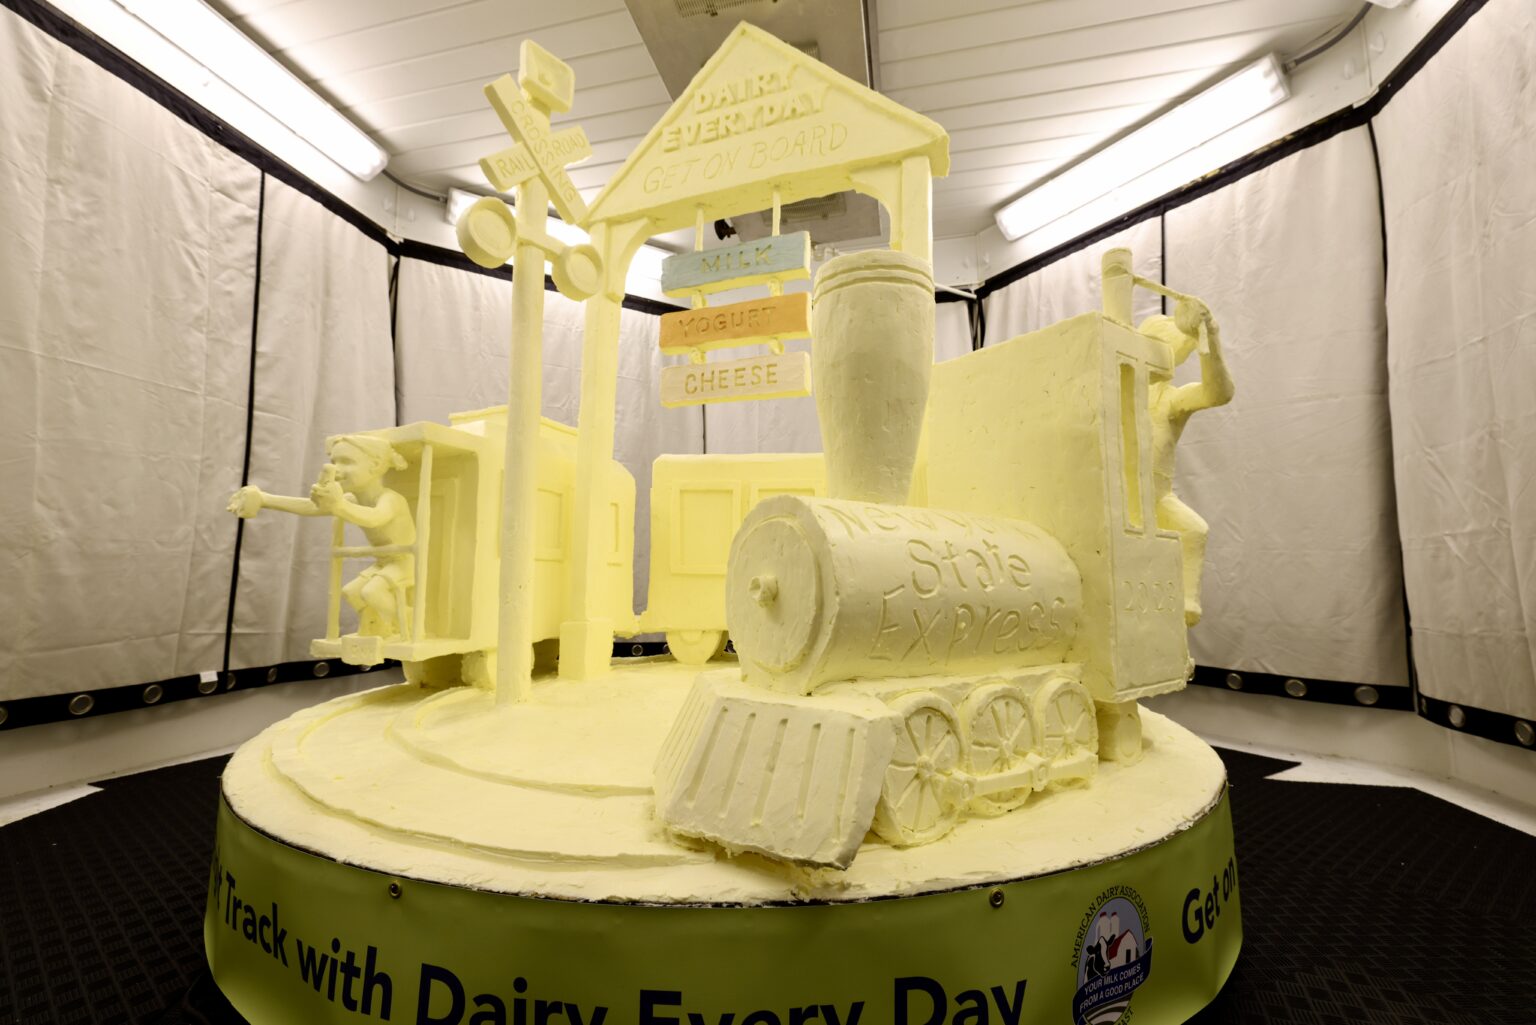 Butter sculpture for New York State Fair has been unveiled